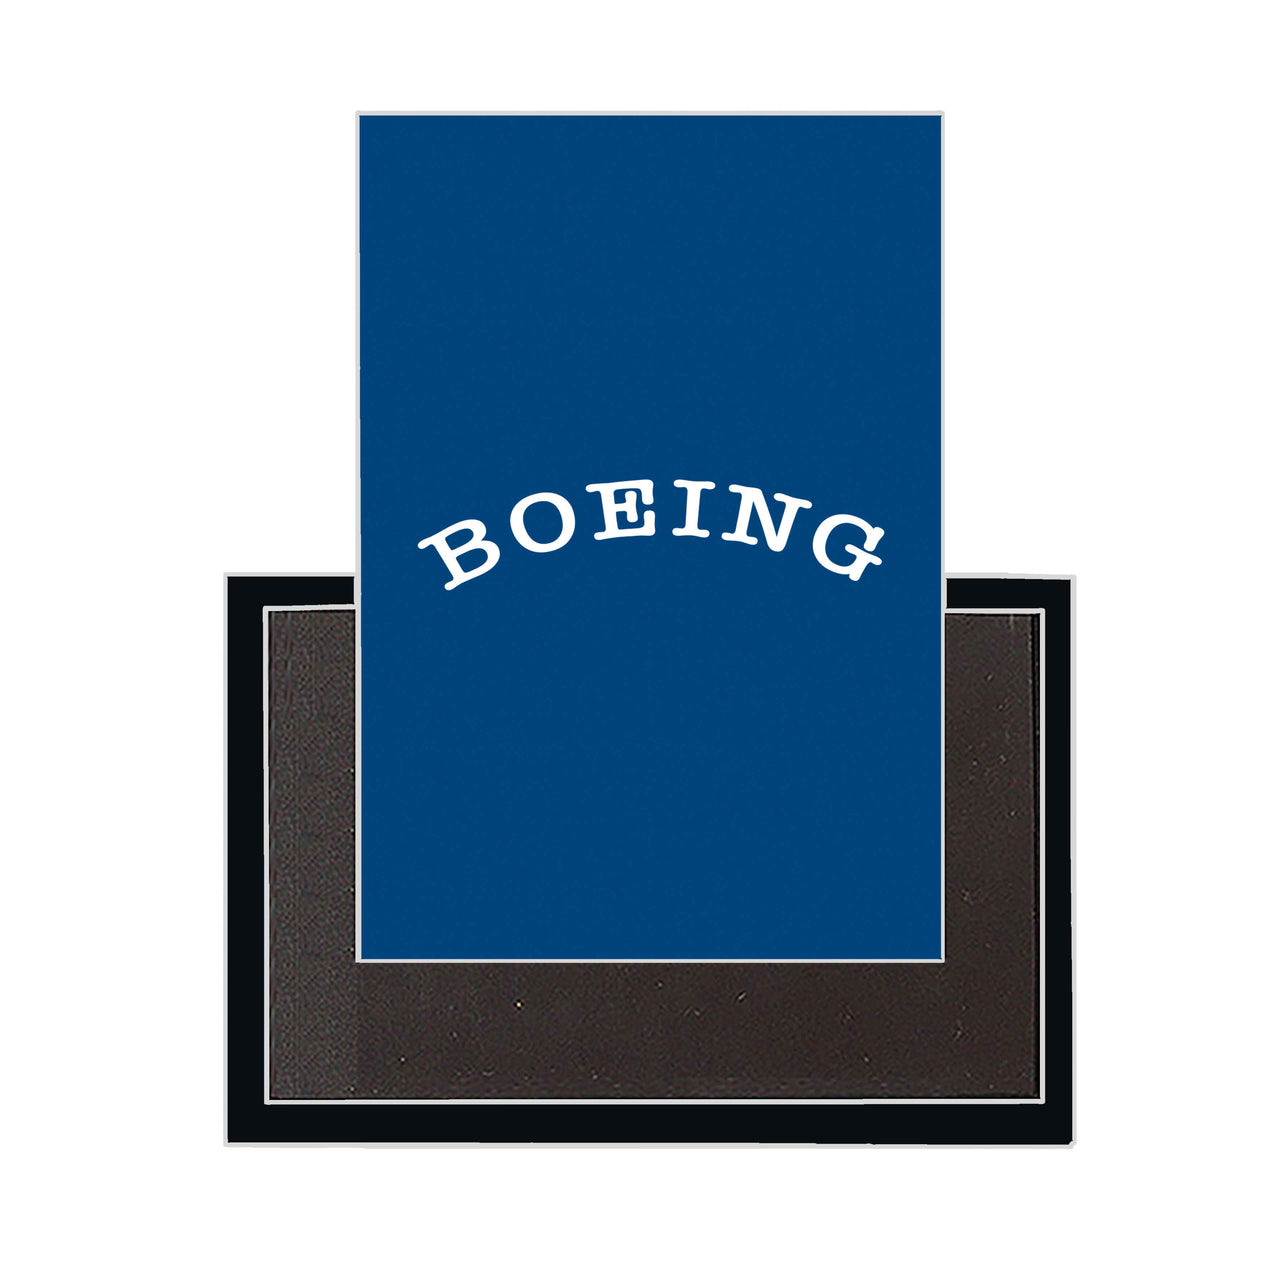 Special BOEING Text Designed Magnets